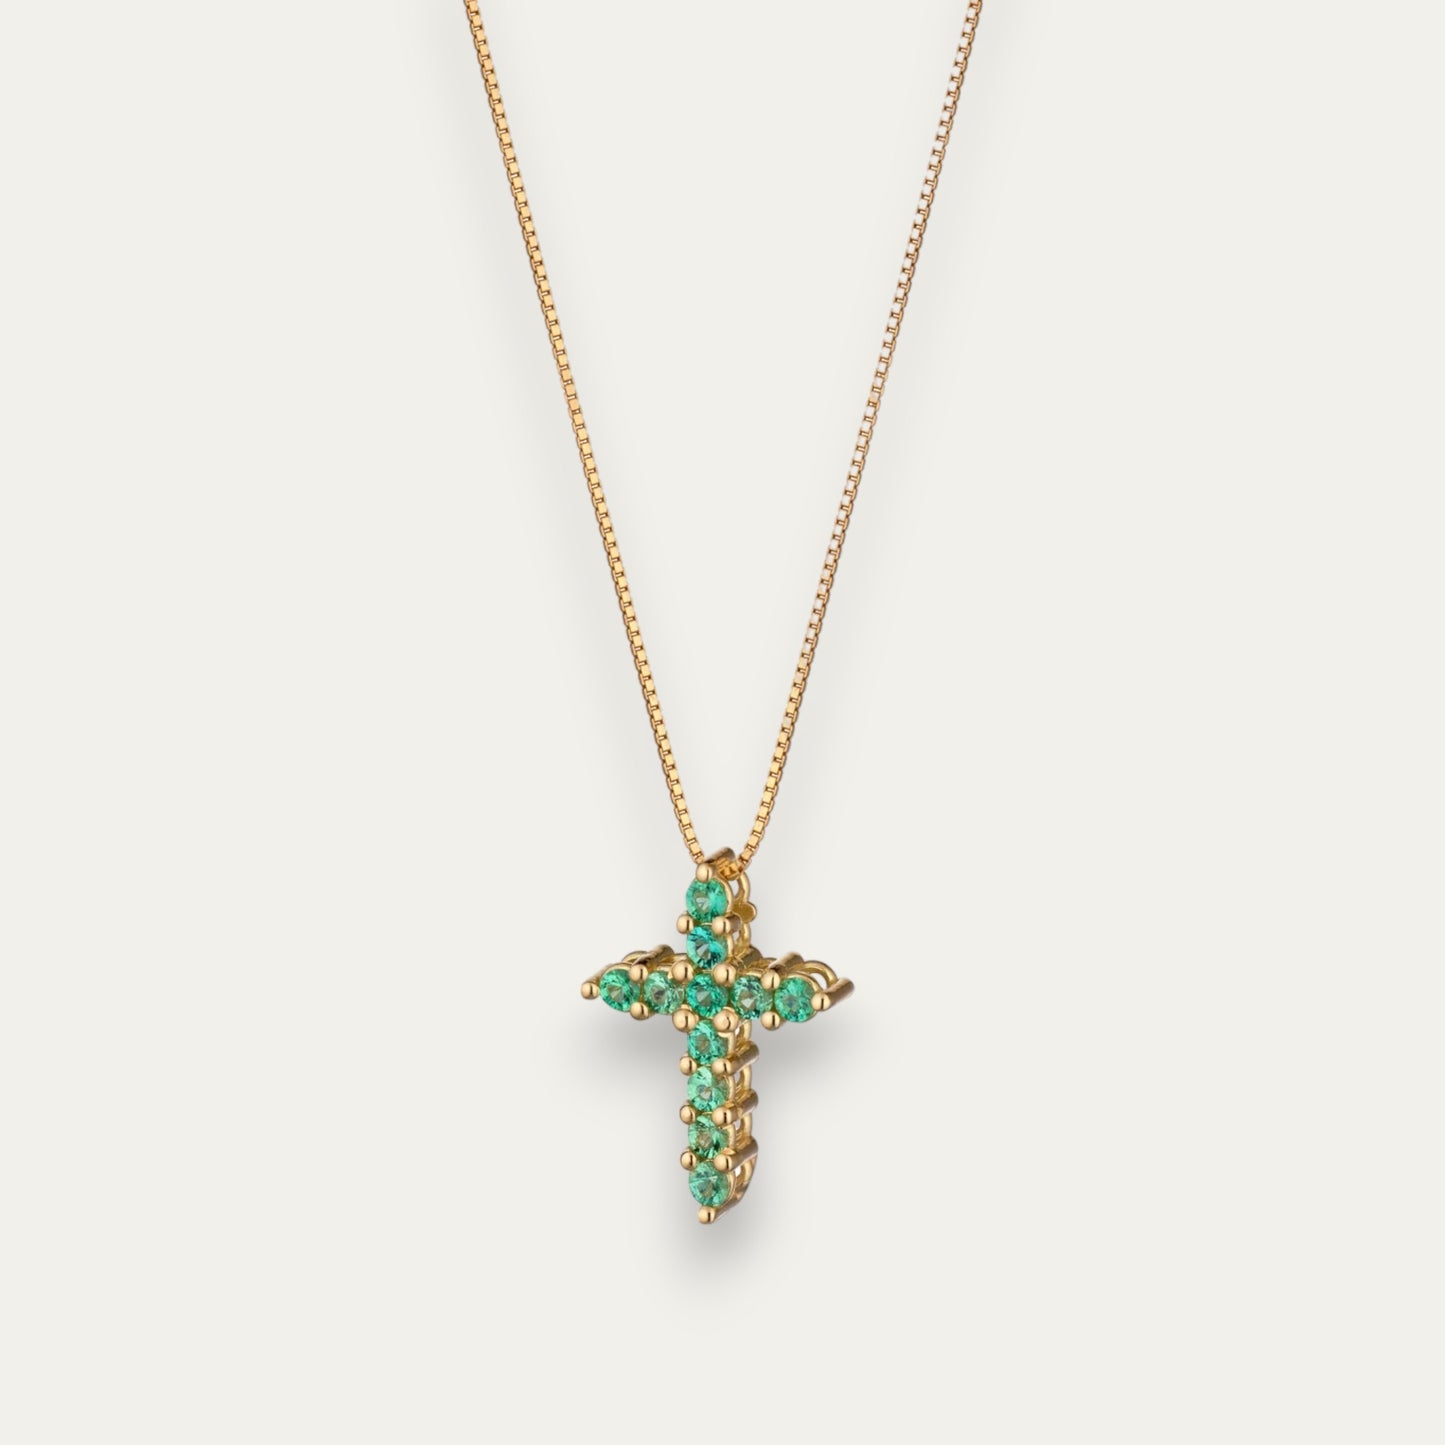 GOTIC CROSS - 18k gold and emerald